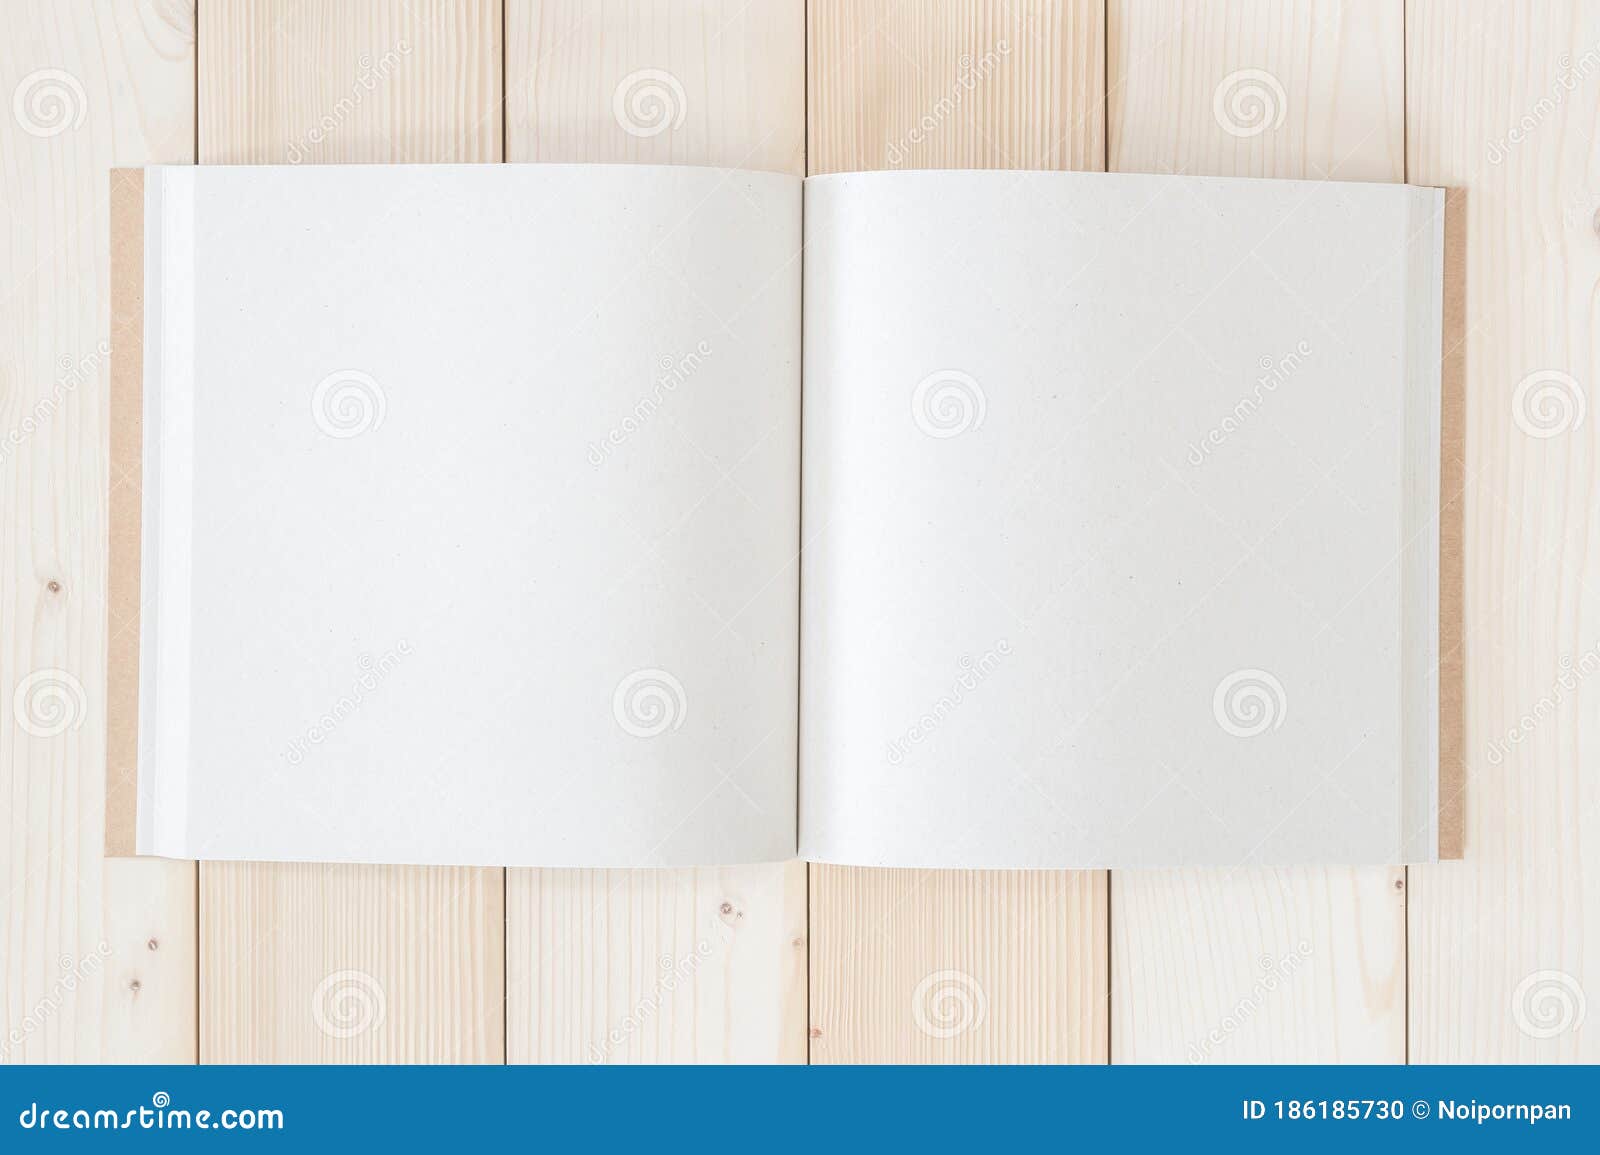 1 228 Brochure Mockup Square Photos Free Royalty Free Stock Photos From Dreamstime